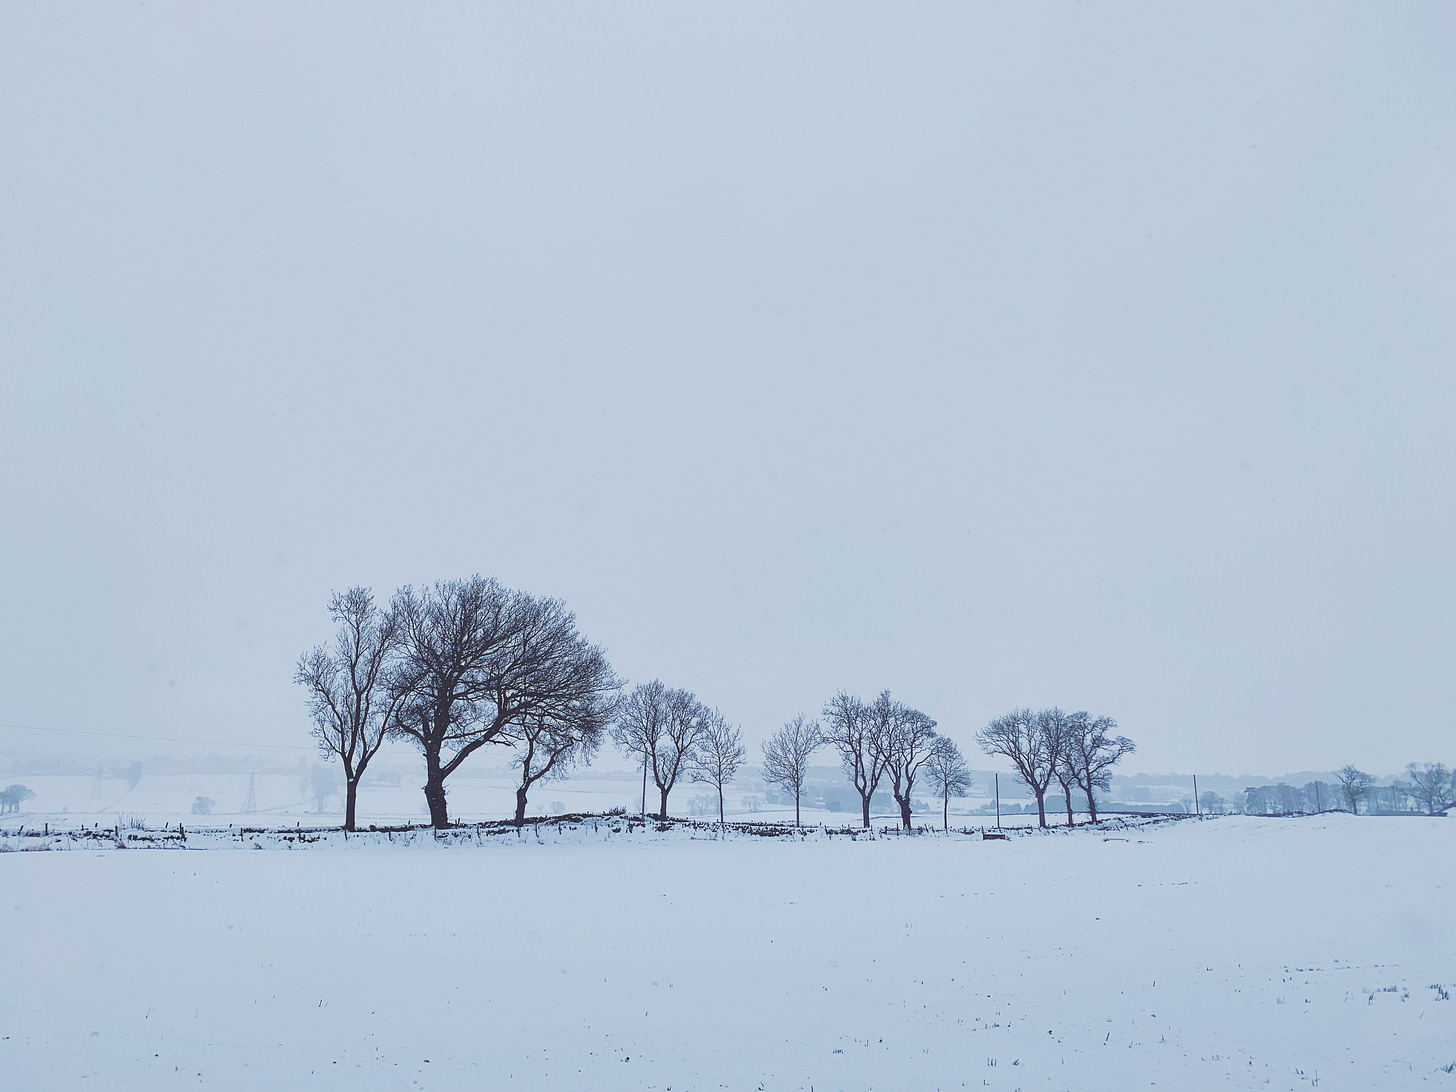 A stark winter scene - the outline of a group of bare trees in a line against a white field covered in snow and the white winter sky